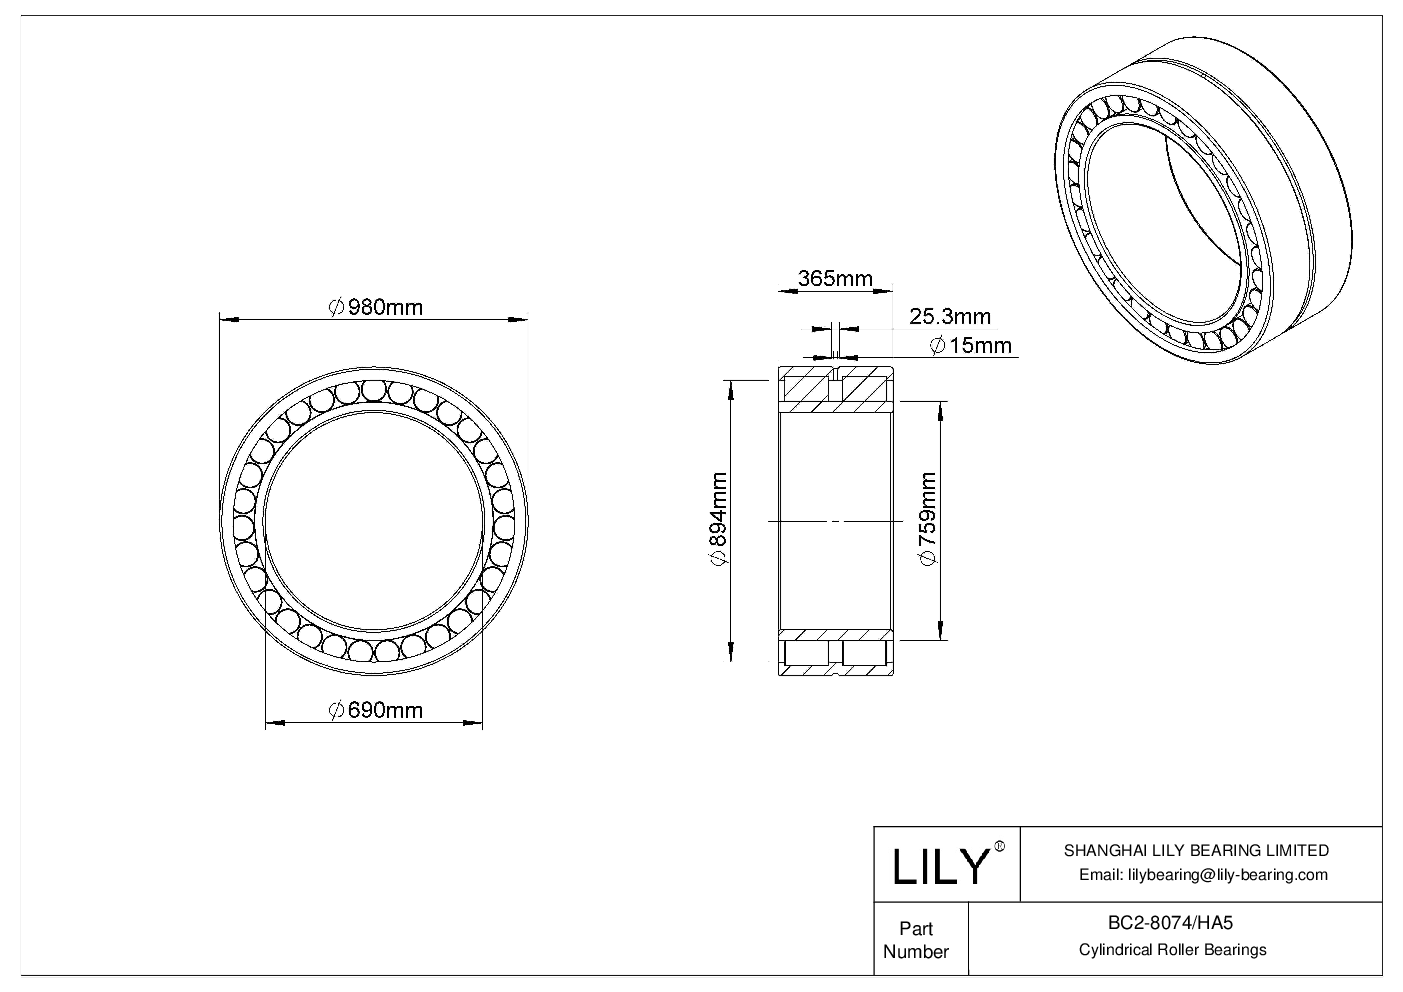 BC2-8074/HA5 Double Row Cylindrical Roller Bearings cad drawing